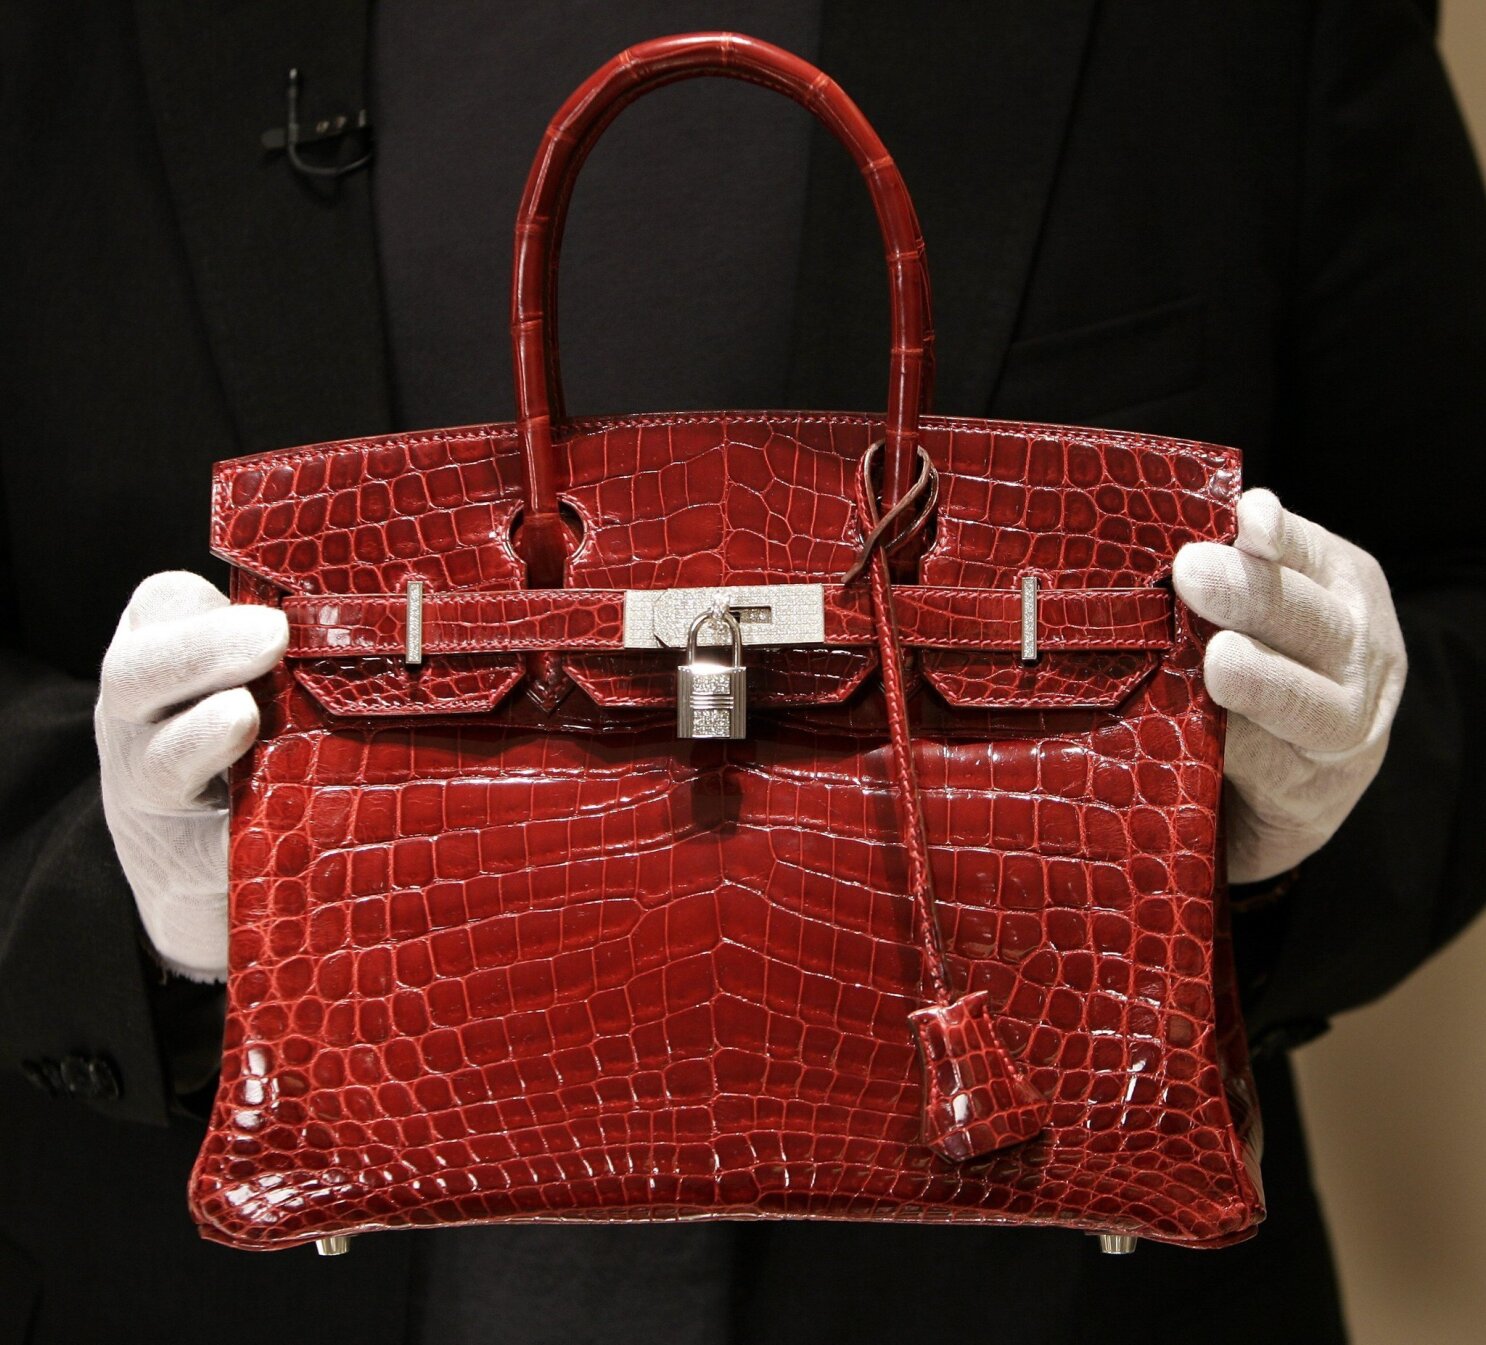 Birkin bag: from status to of shame - Los Angeles Times